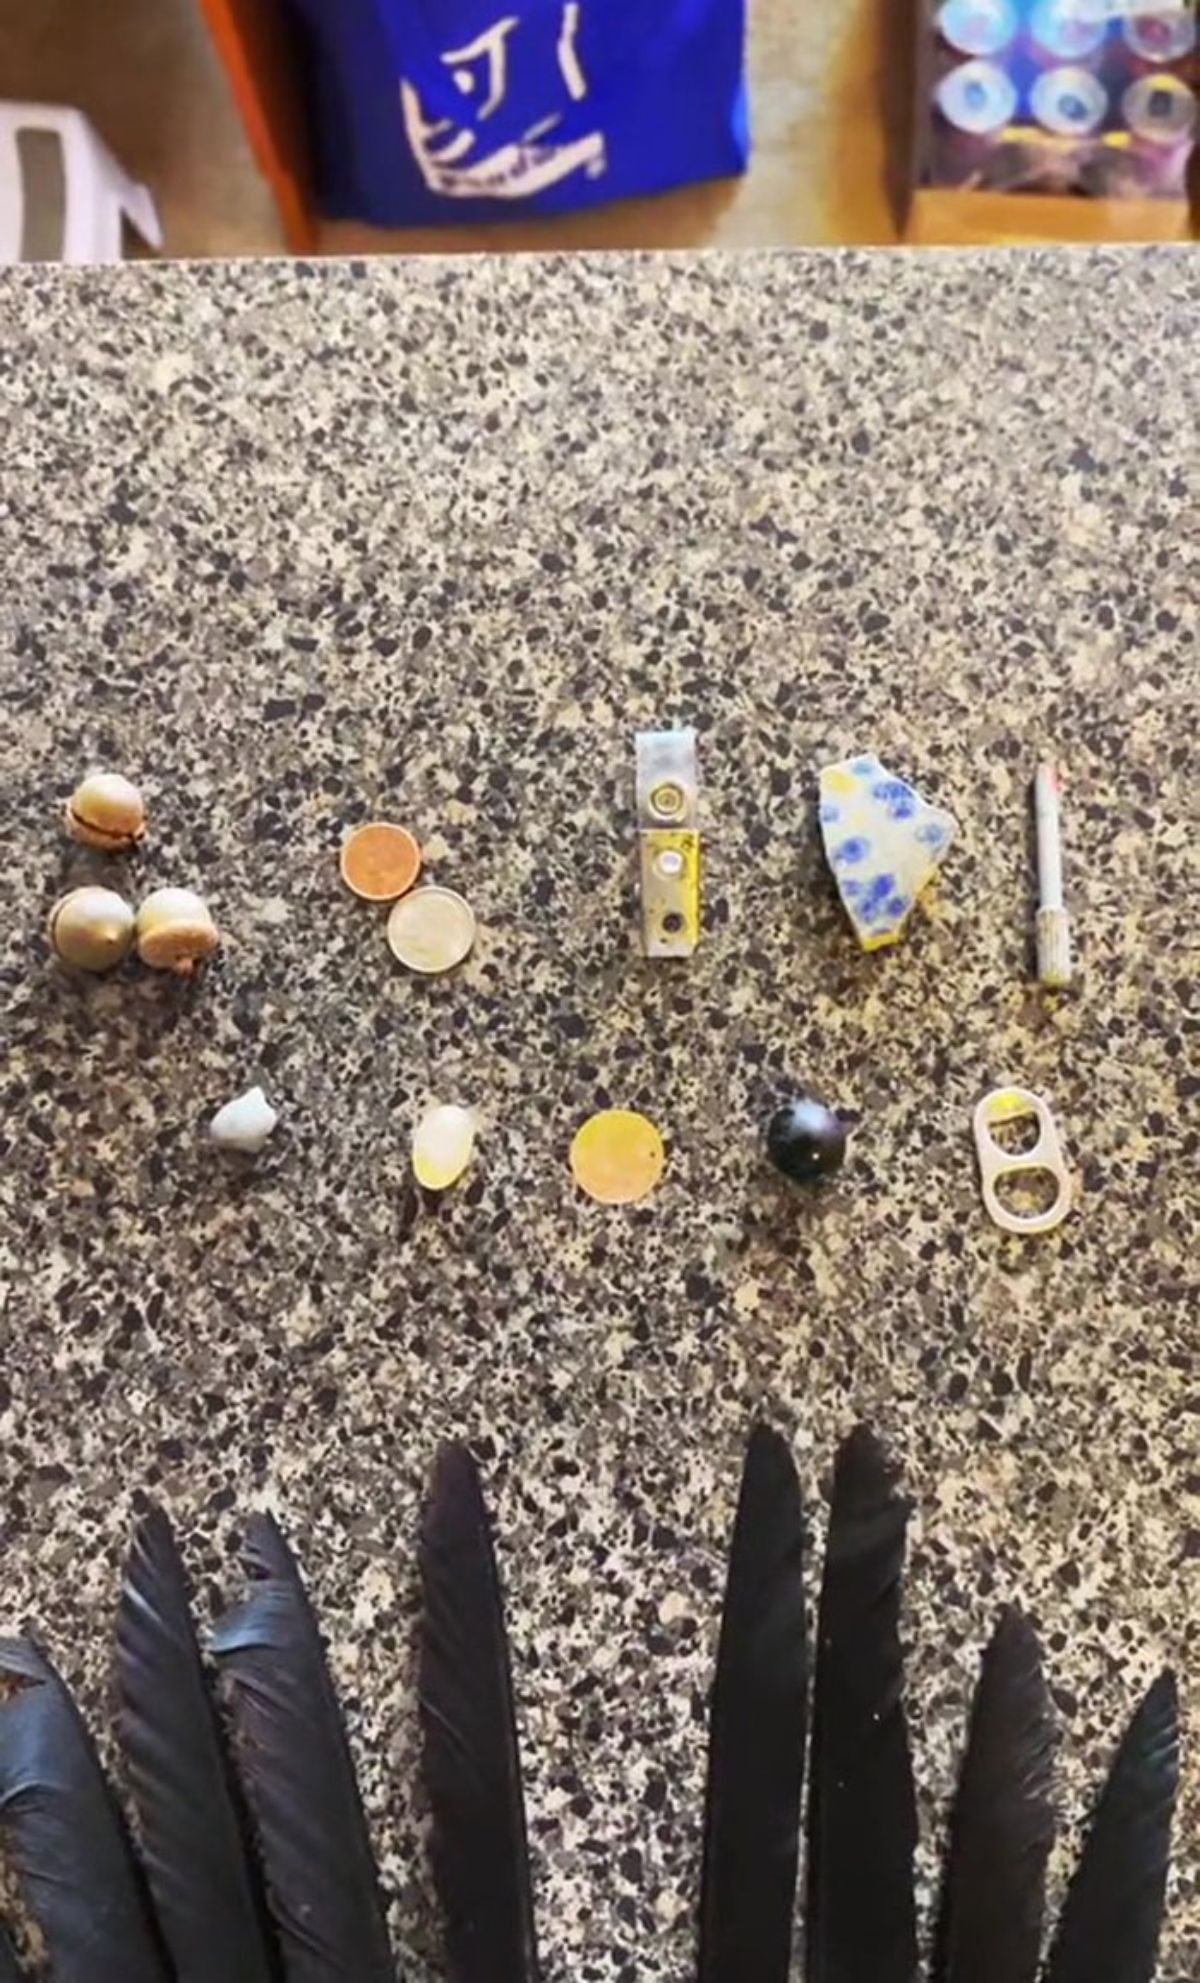 some black feathers, 3 acorns, small fruits and other small items on a marble counter